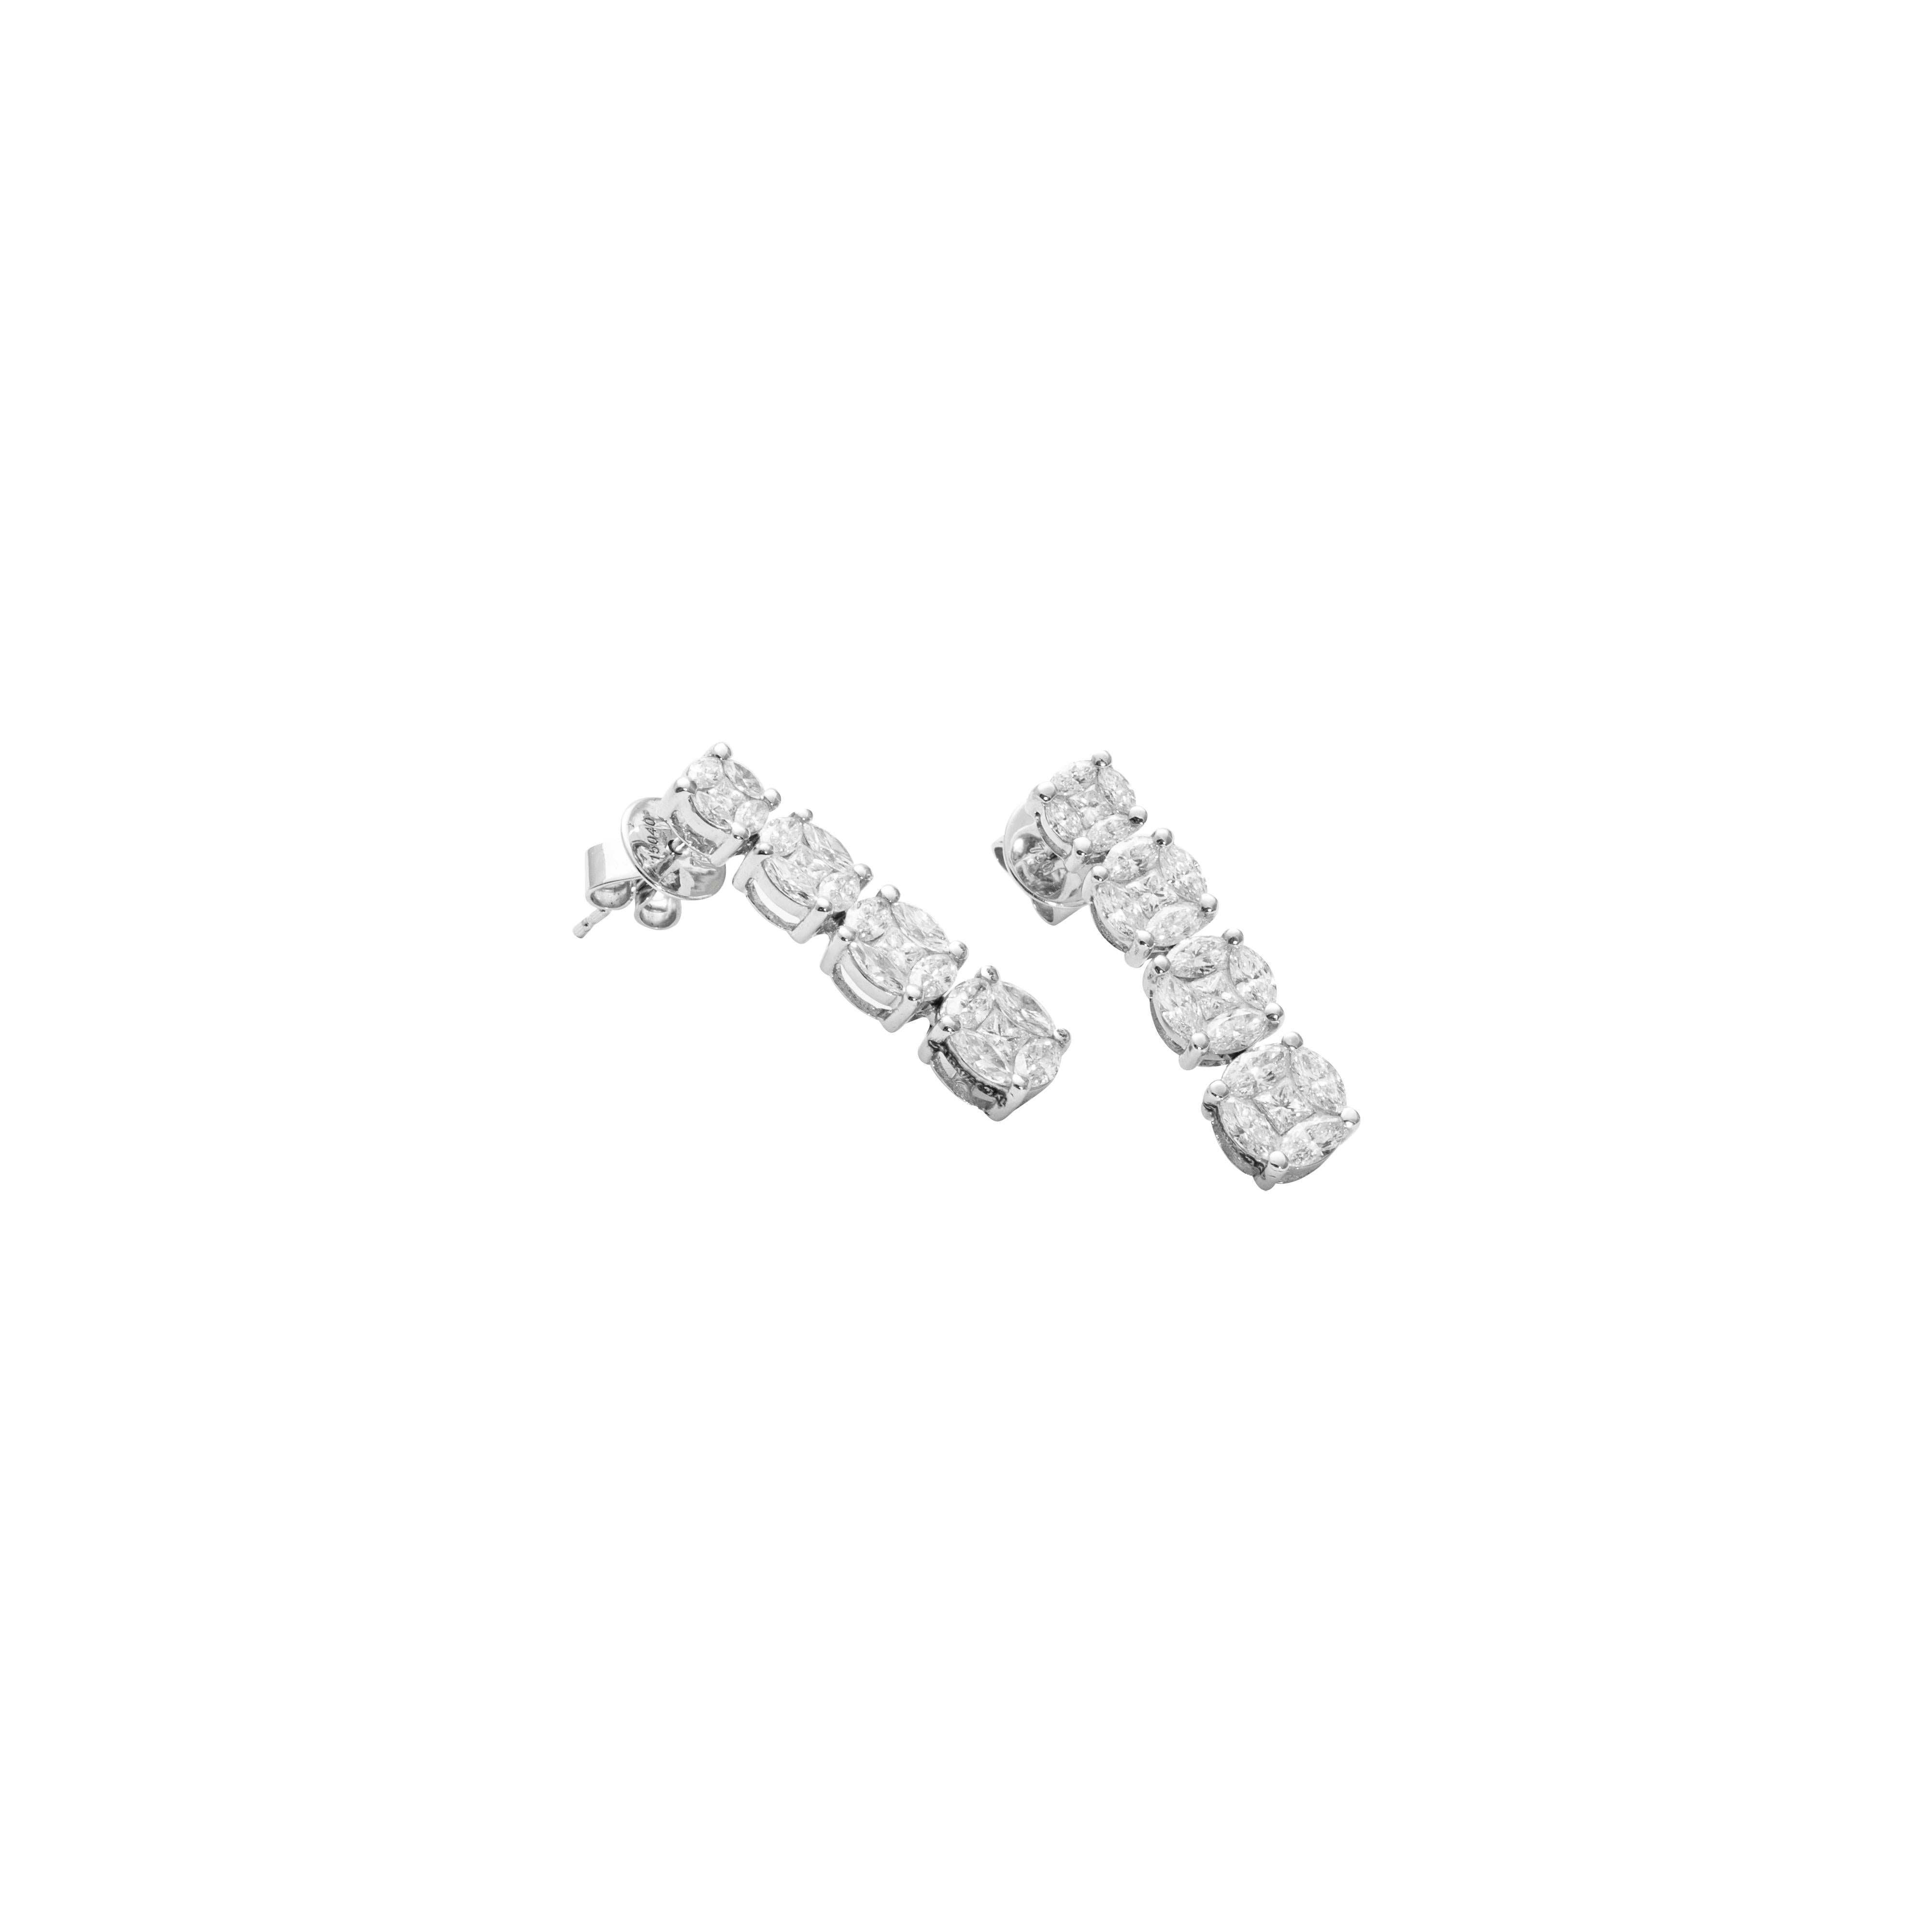 18 Karat White Gold Illusion Setting Diamond Earrings

Elegant earrings set in 18 Karat white gold studded with white diamonds (including princess cut & marquise cut diamonds) in an illusion setting to give the look of a solitaire. These earrings